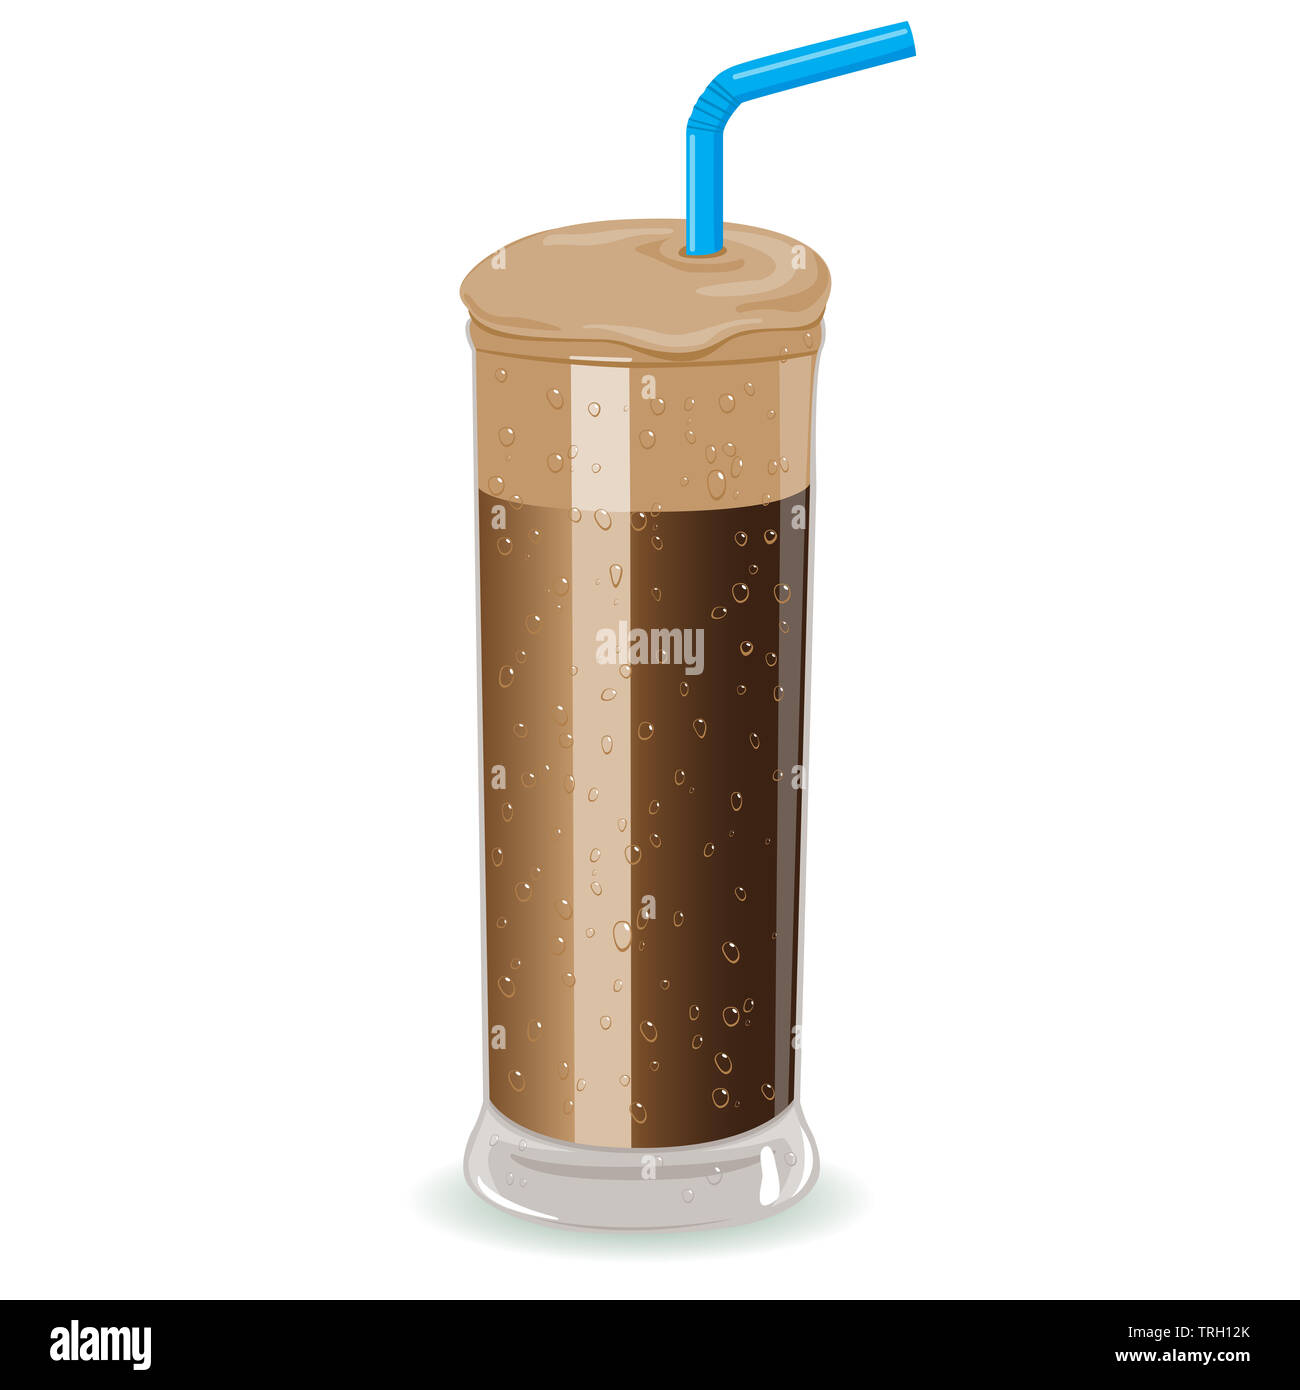 Nescafe Frappe High Resolution Stock Photography and Images - Alamy